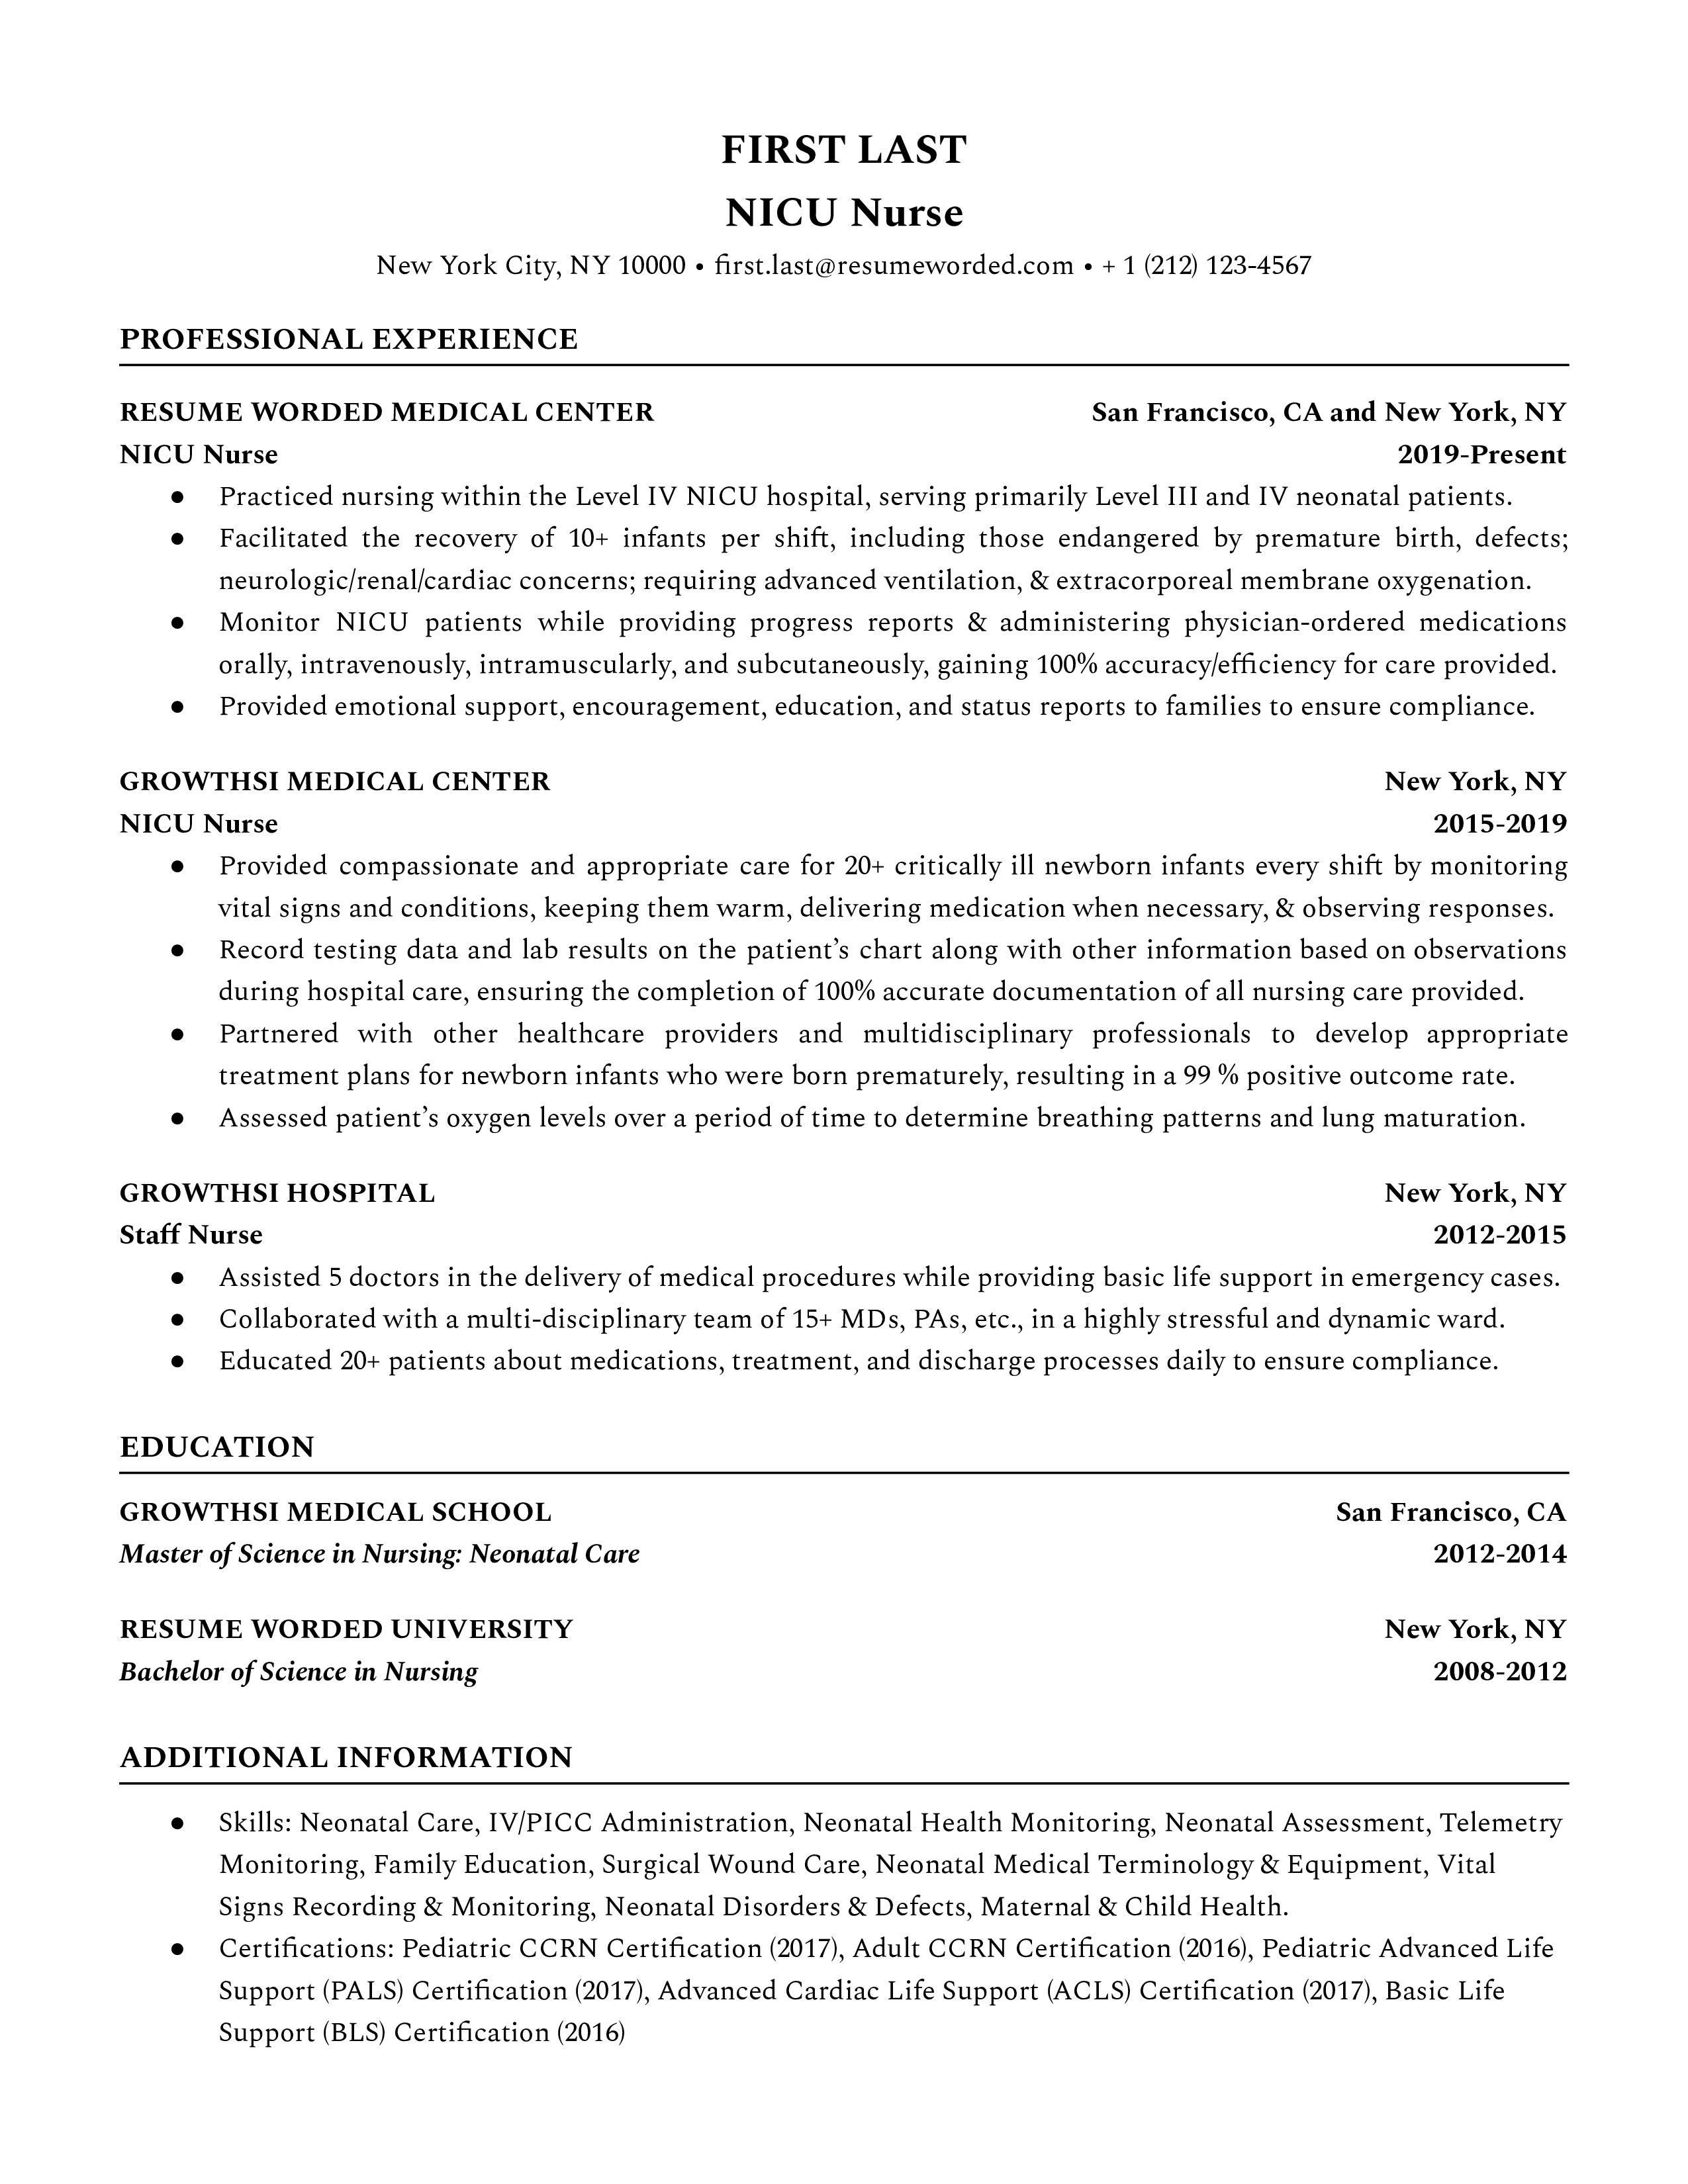 NICU nurse resume template sample tailored to the position and featuring an easily skimmable skills section